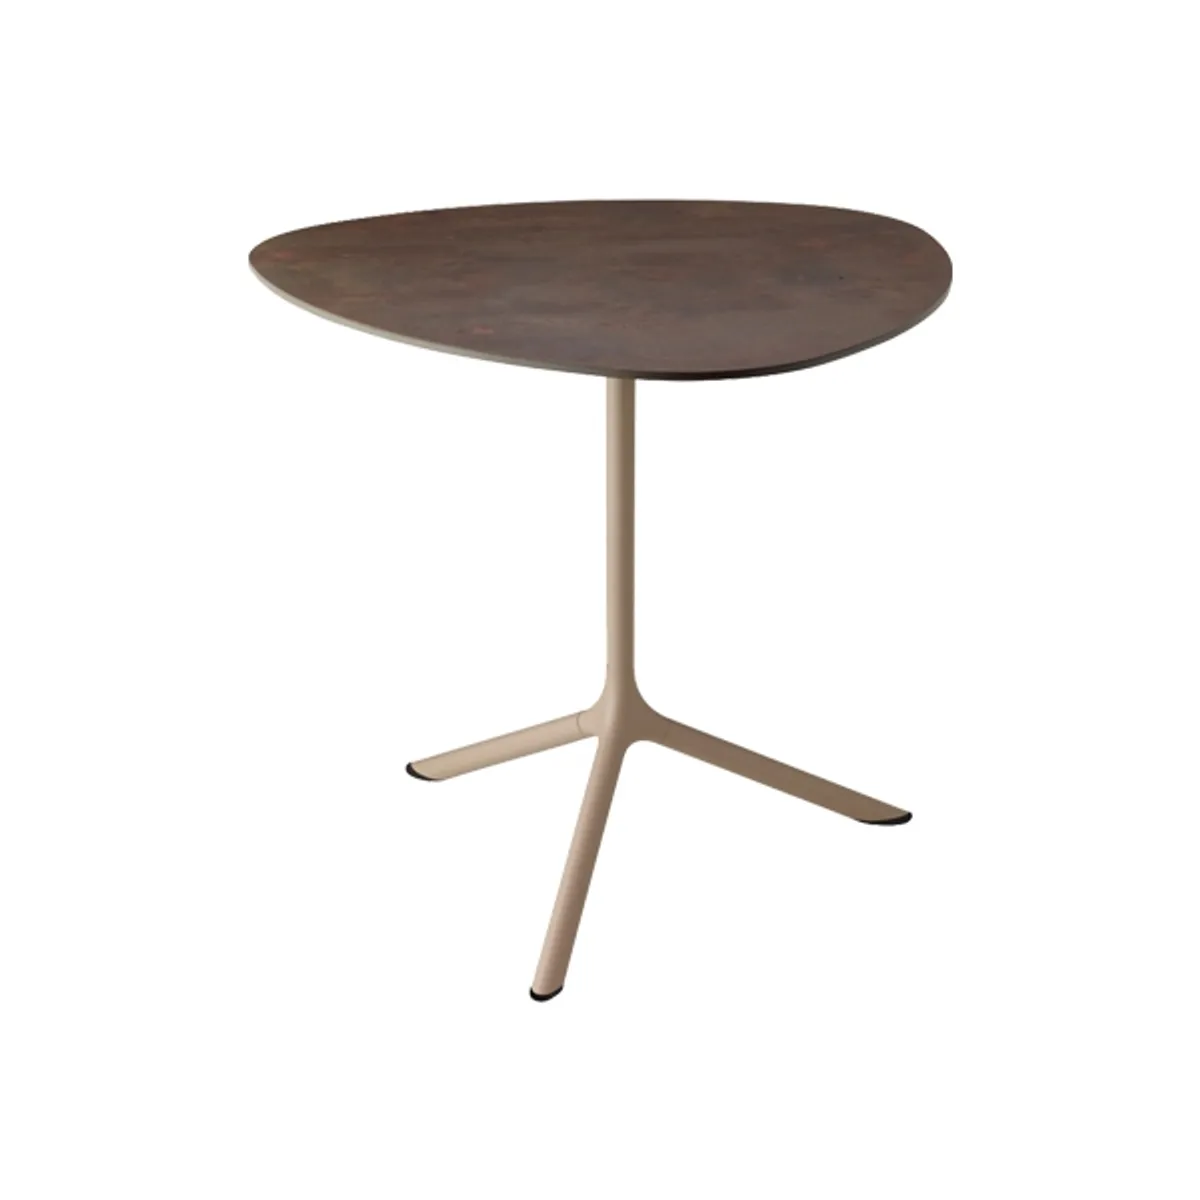 Trinette triangular table Inside Out Contracts